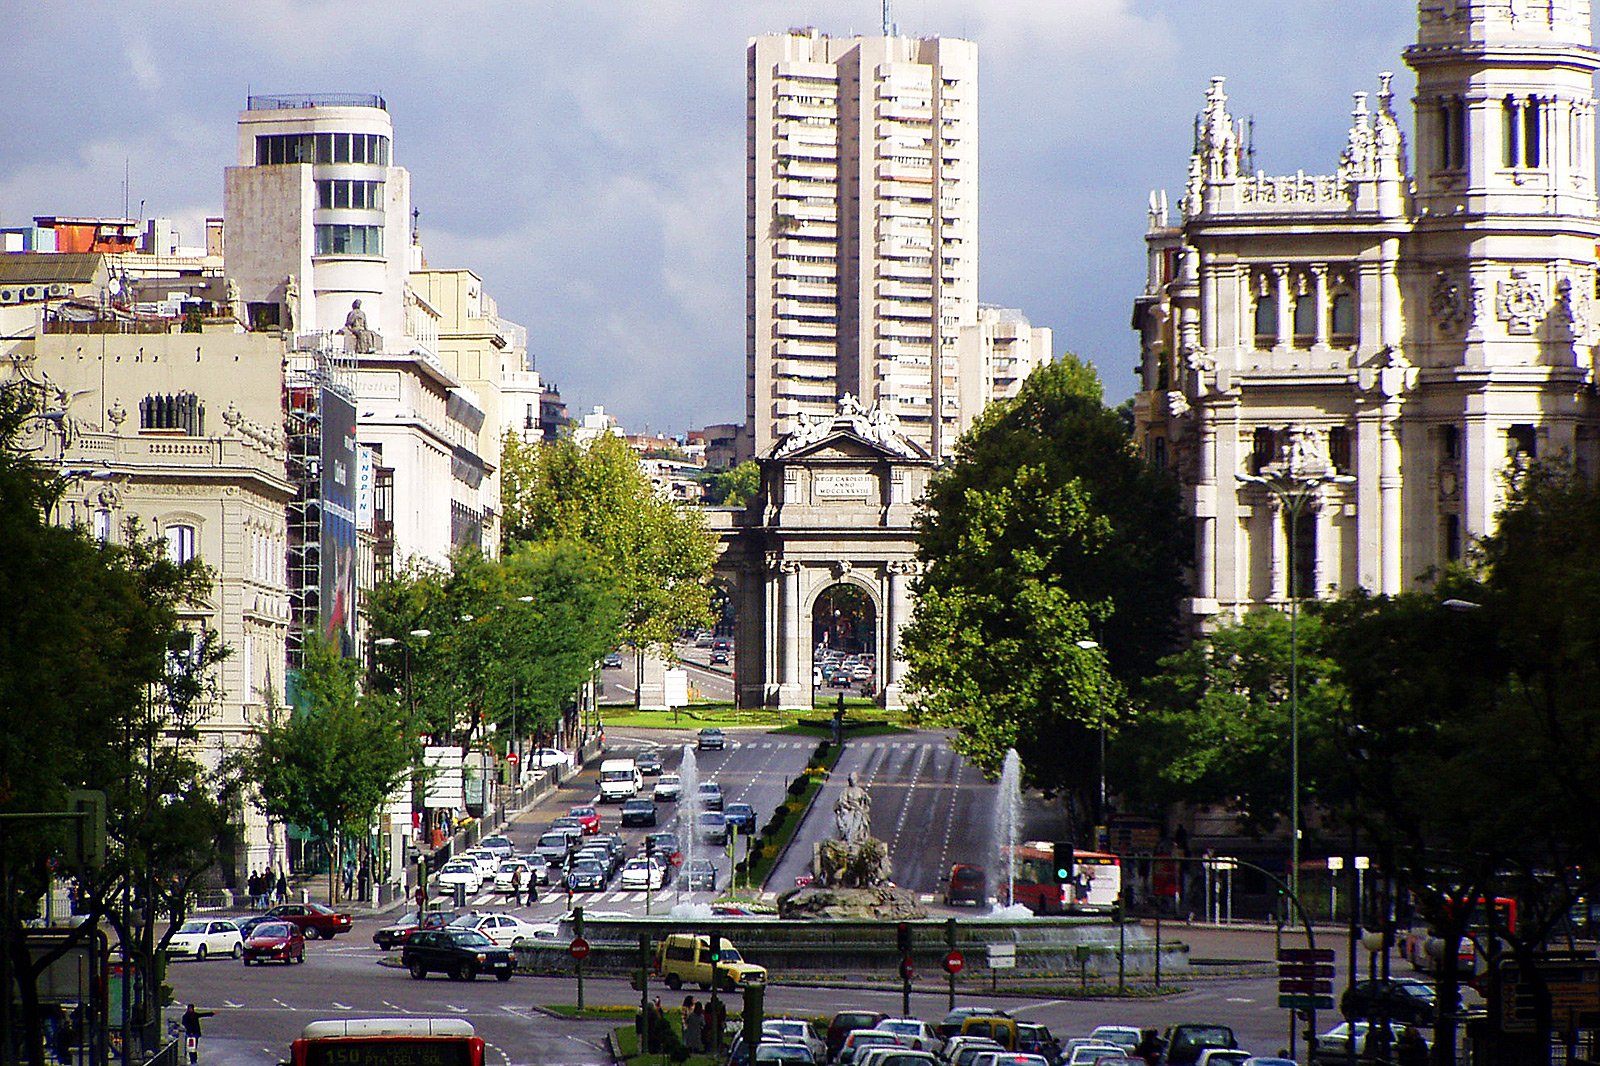 How to see Puerta de Alcalá in Madrid